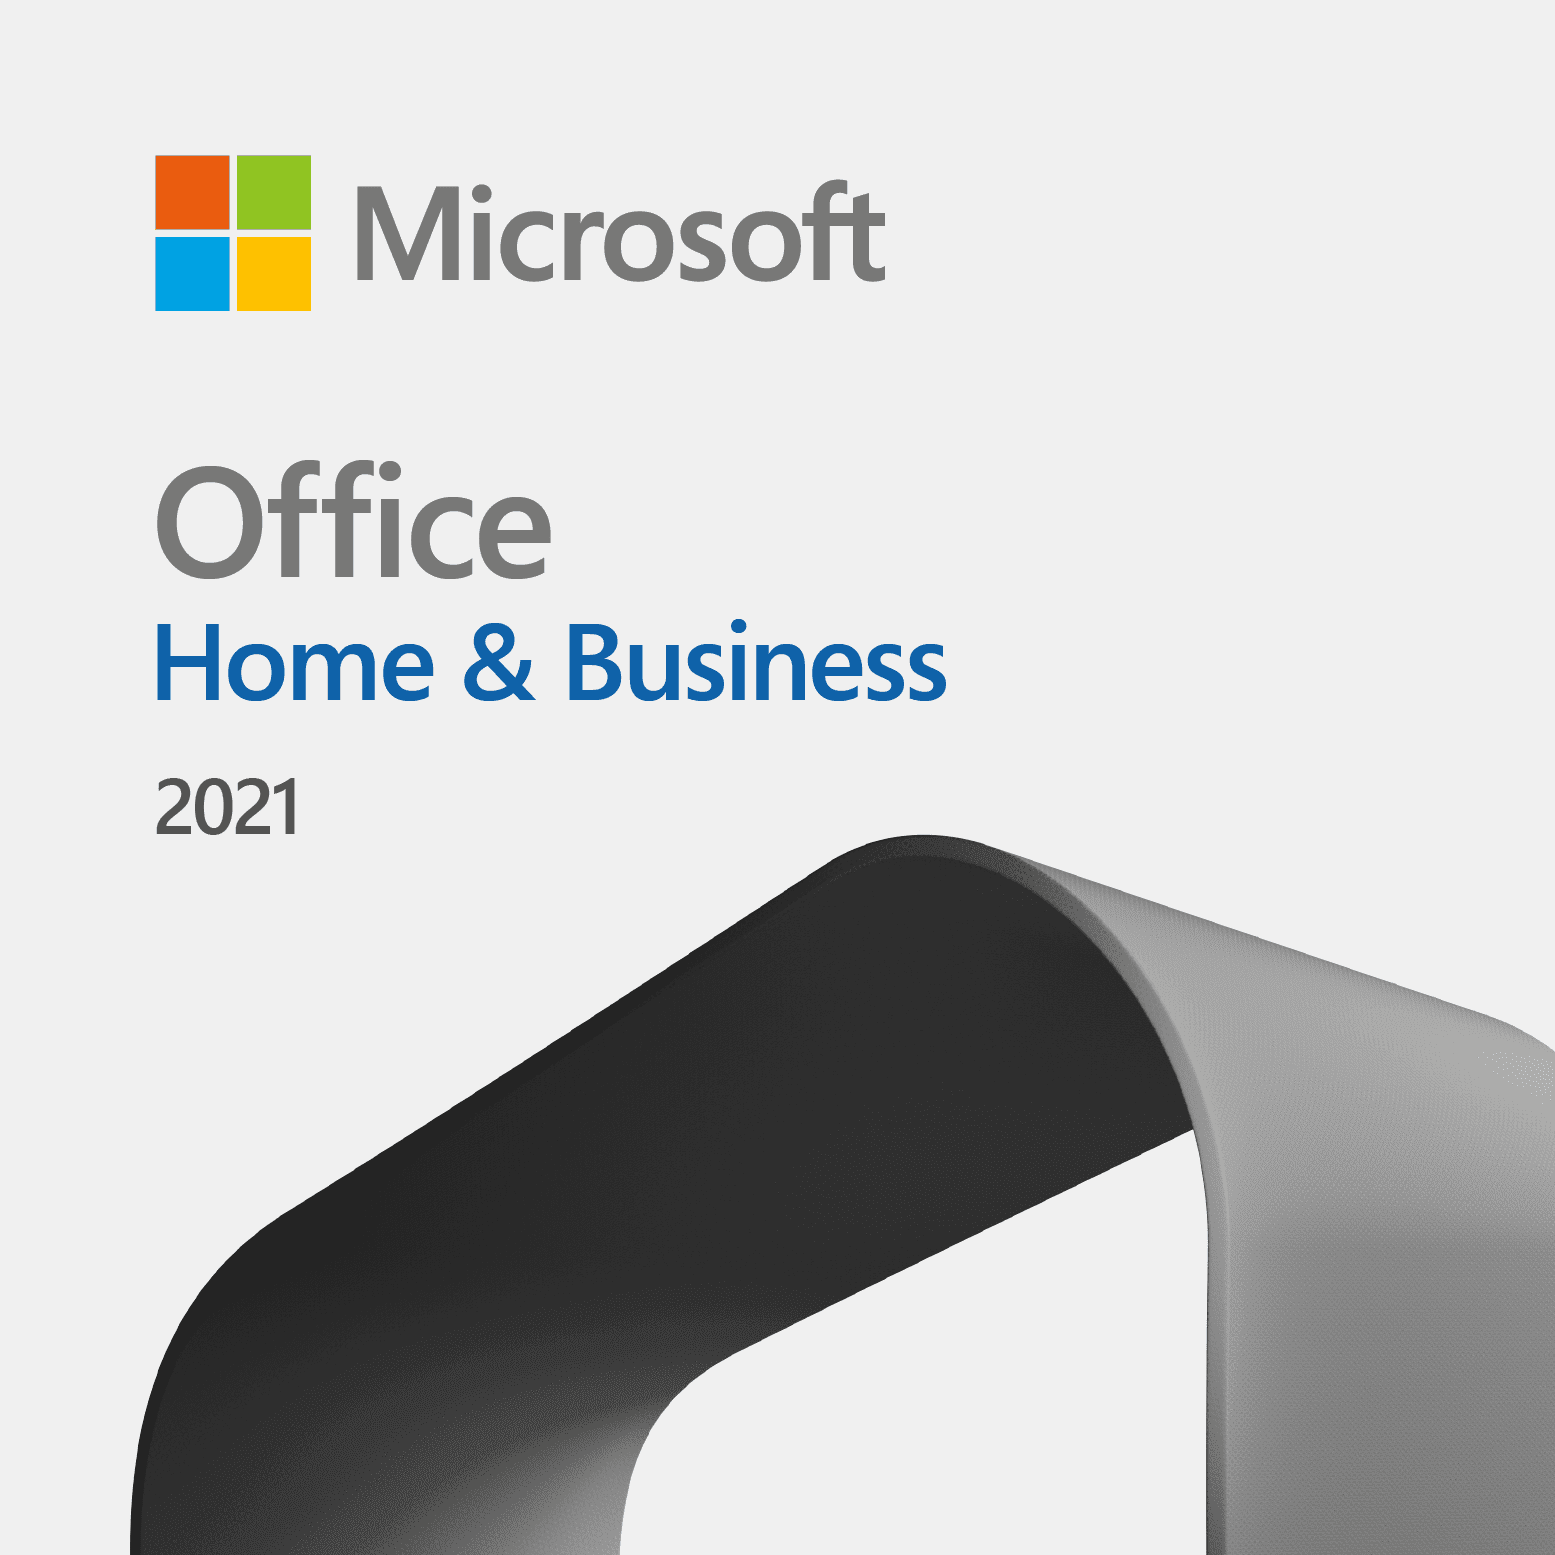 Microsoft Office 2021 Home and Business for Mac-Os - Microsoft